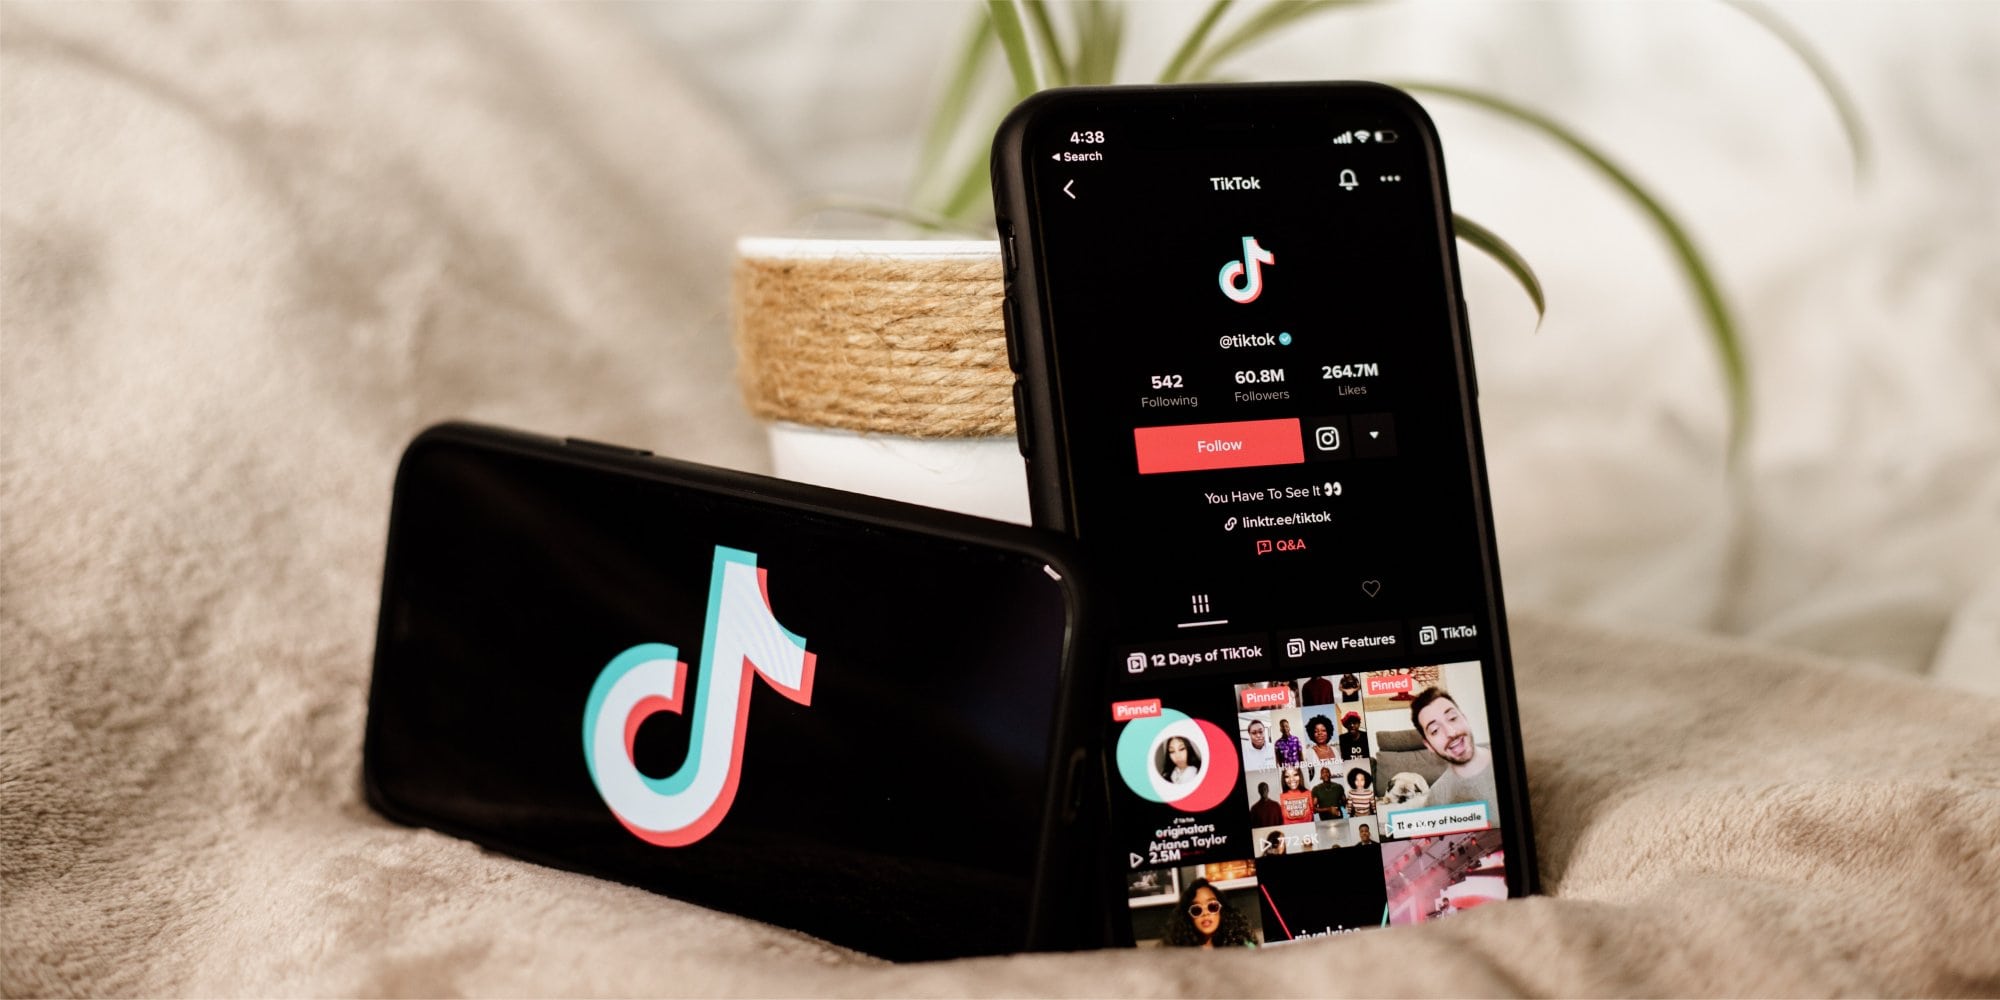 How to Promote Products on TikTok: 18 Post Ideas That Work